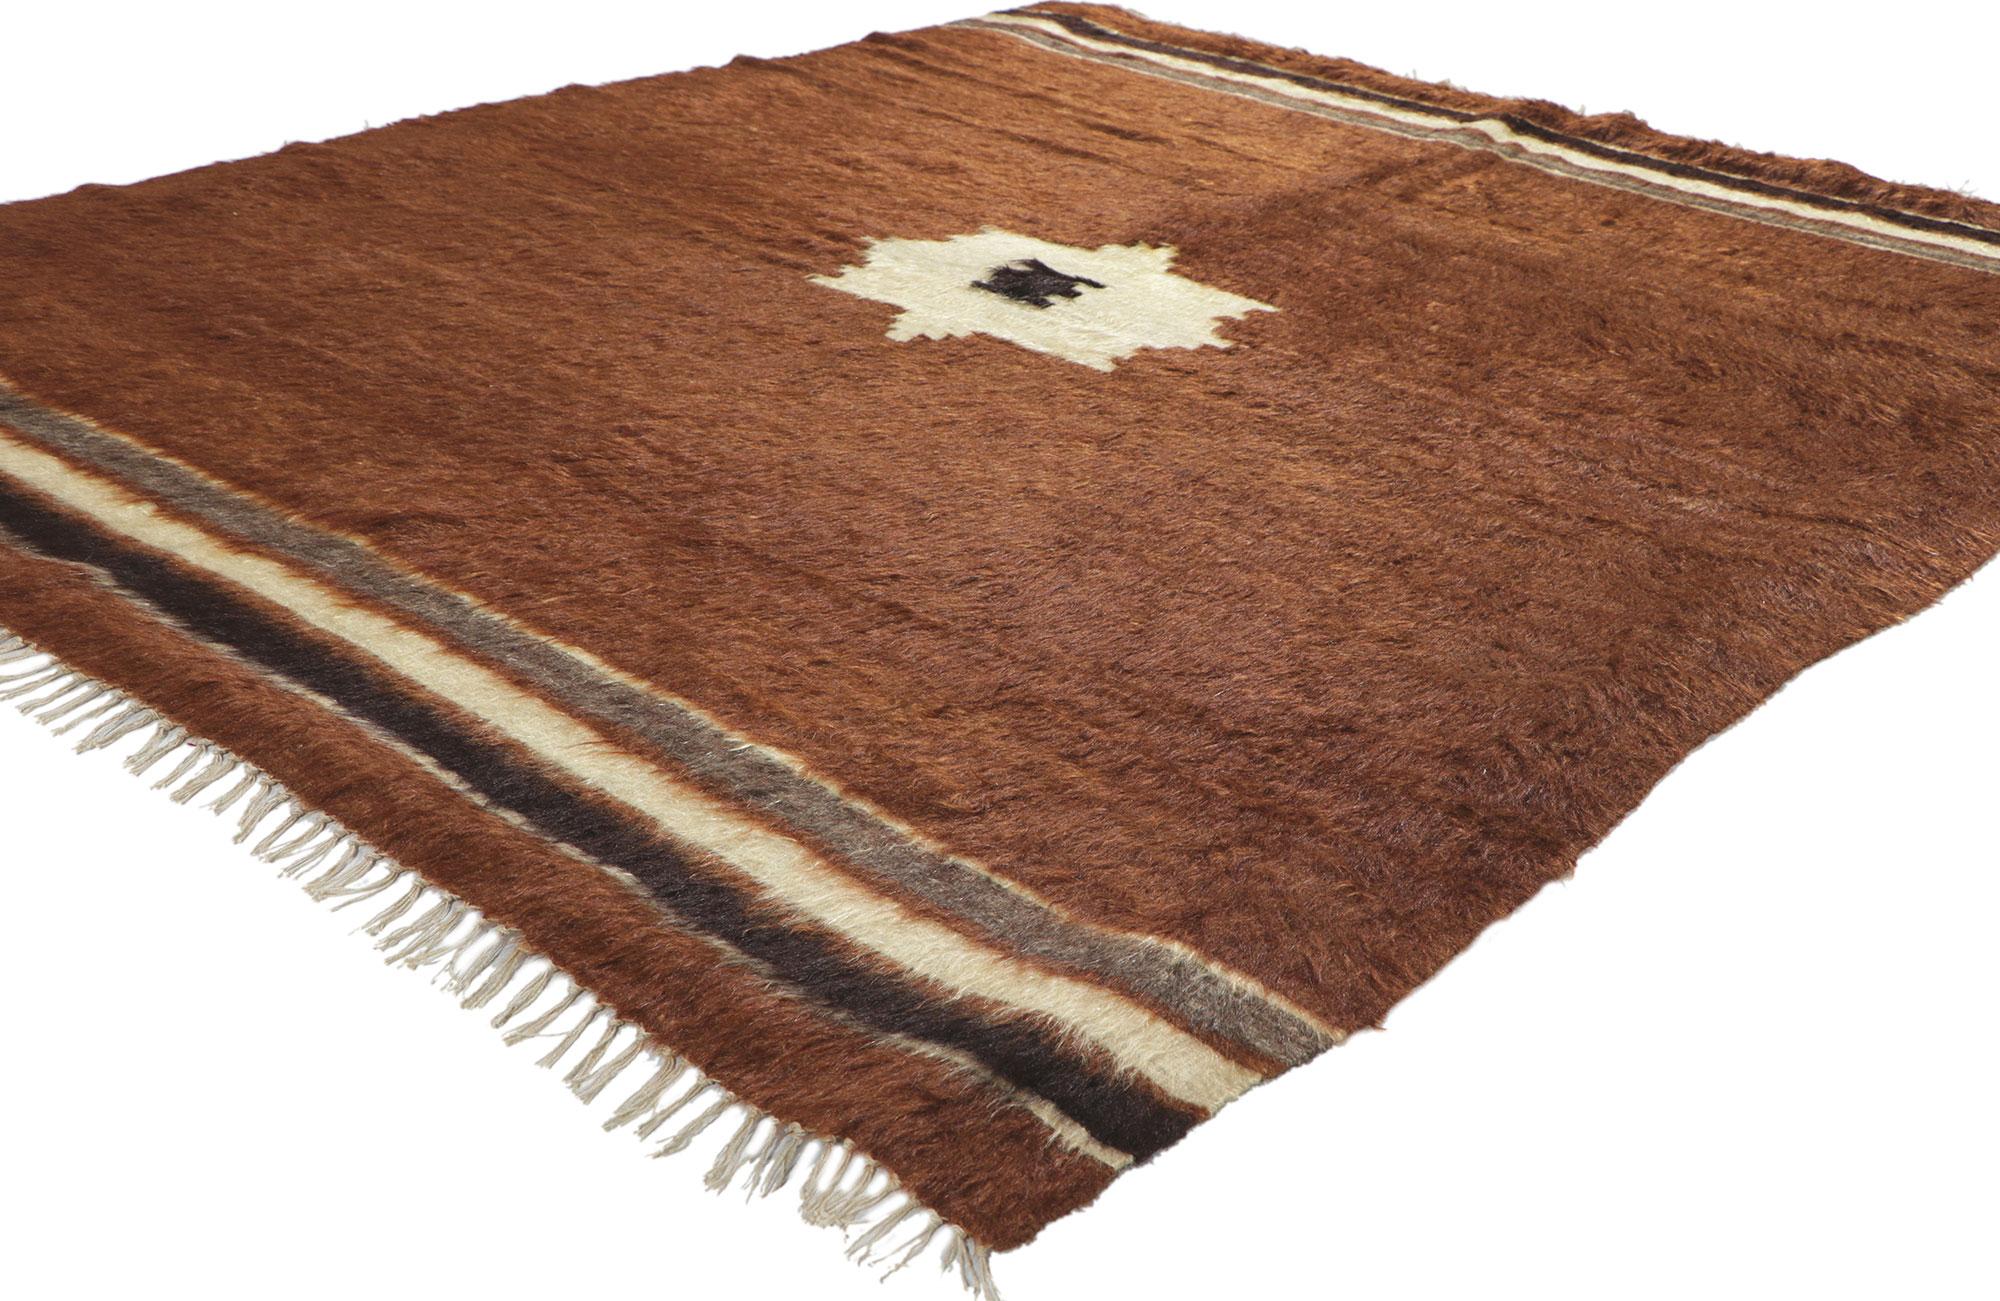 53843 Vintage Turkish Angora Wool Kilim Blanket Rug, 04'10 x 05'07.
With its shaggy pile, incredible detail and texture, this handwoven Turkish angora kilim rug is a captivating vision of woven beauty. The eye-catching geometric design and earthy